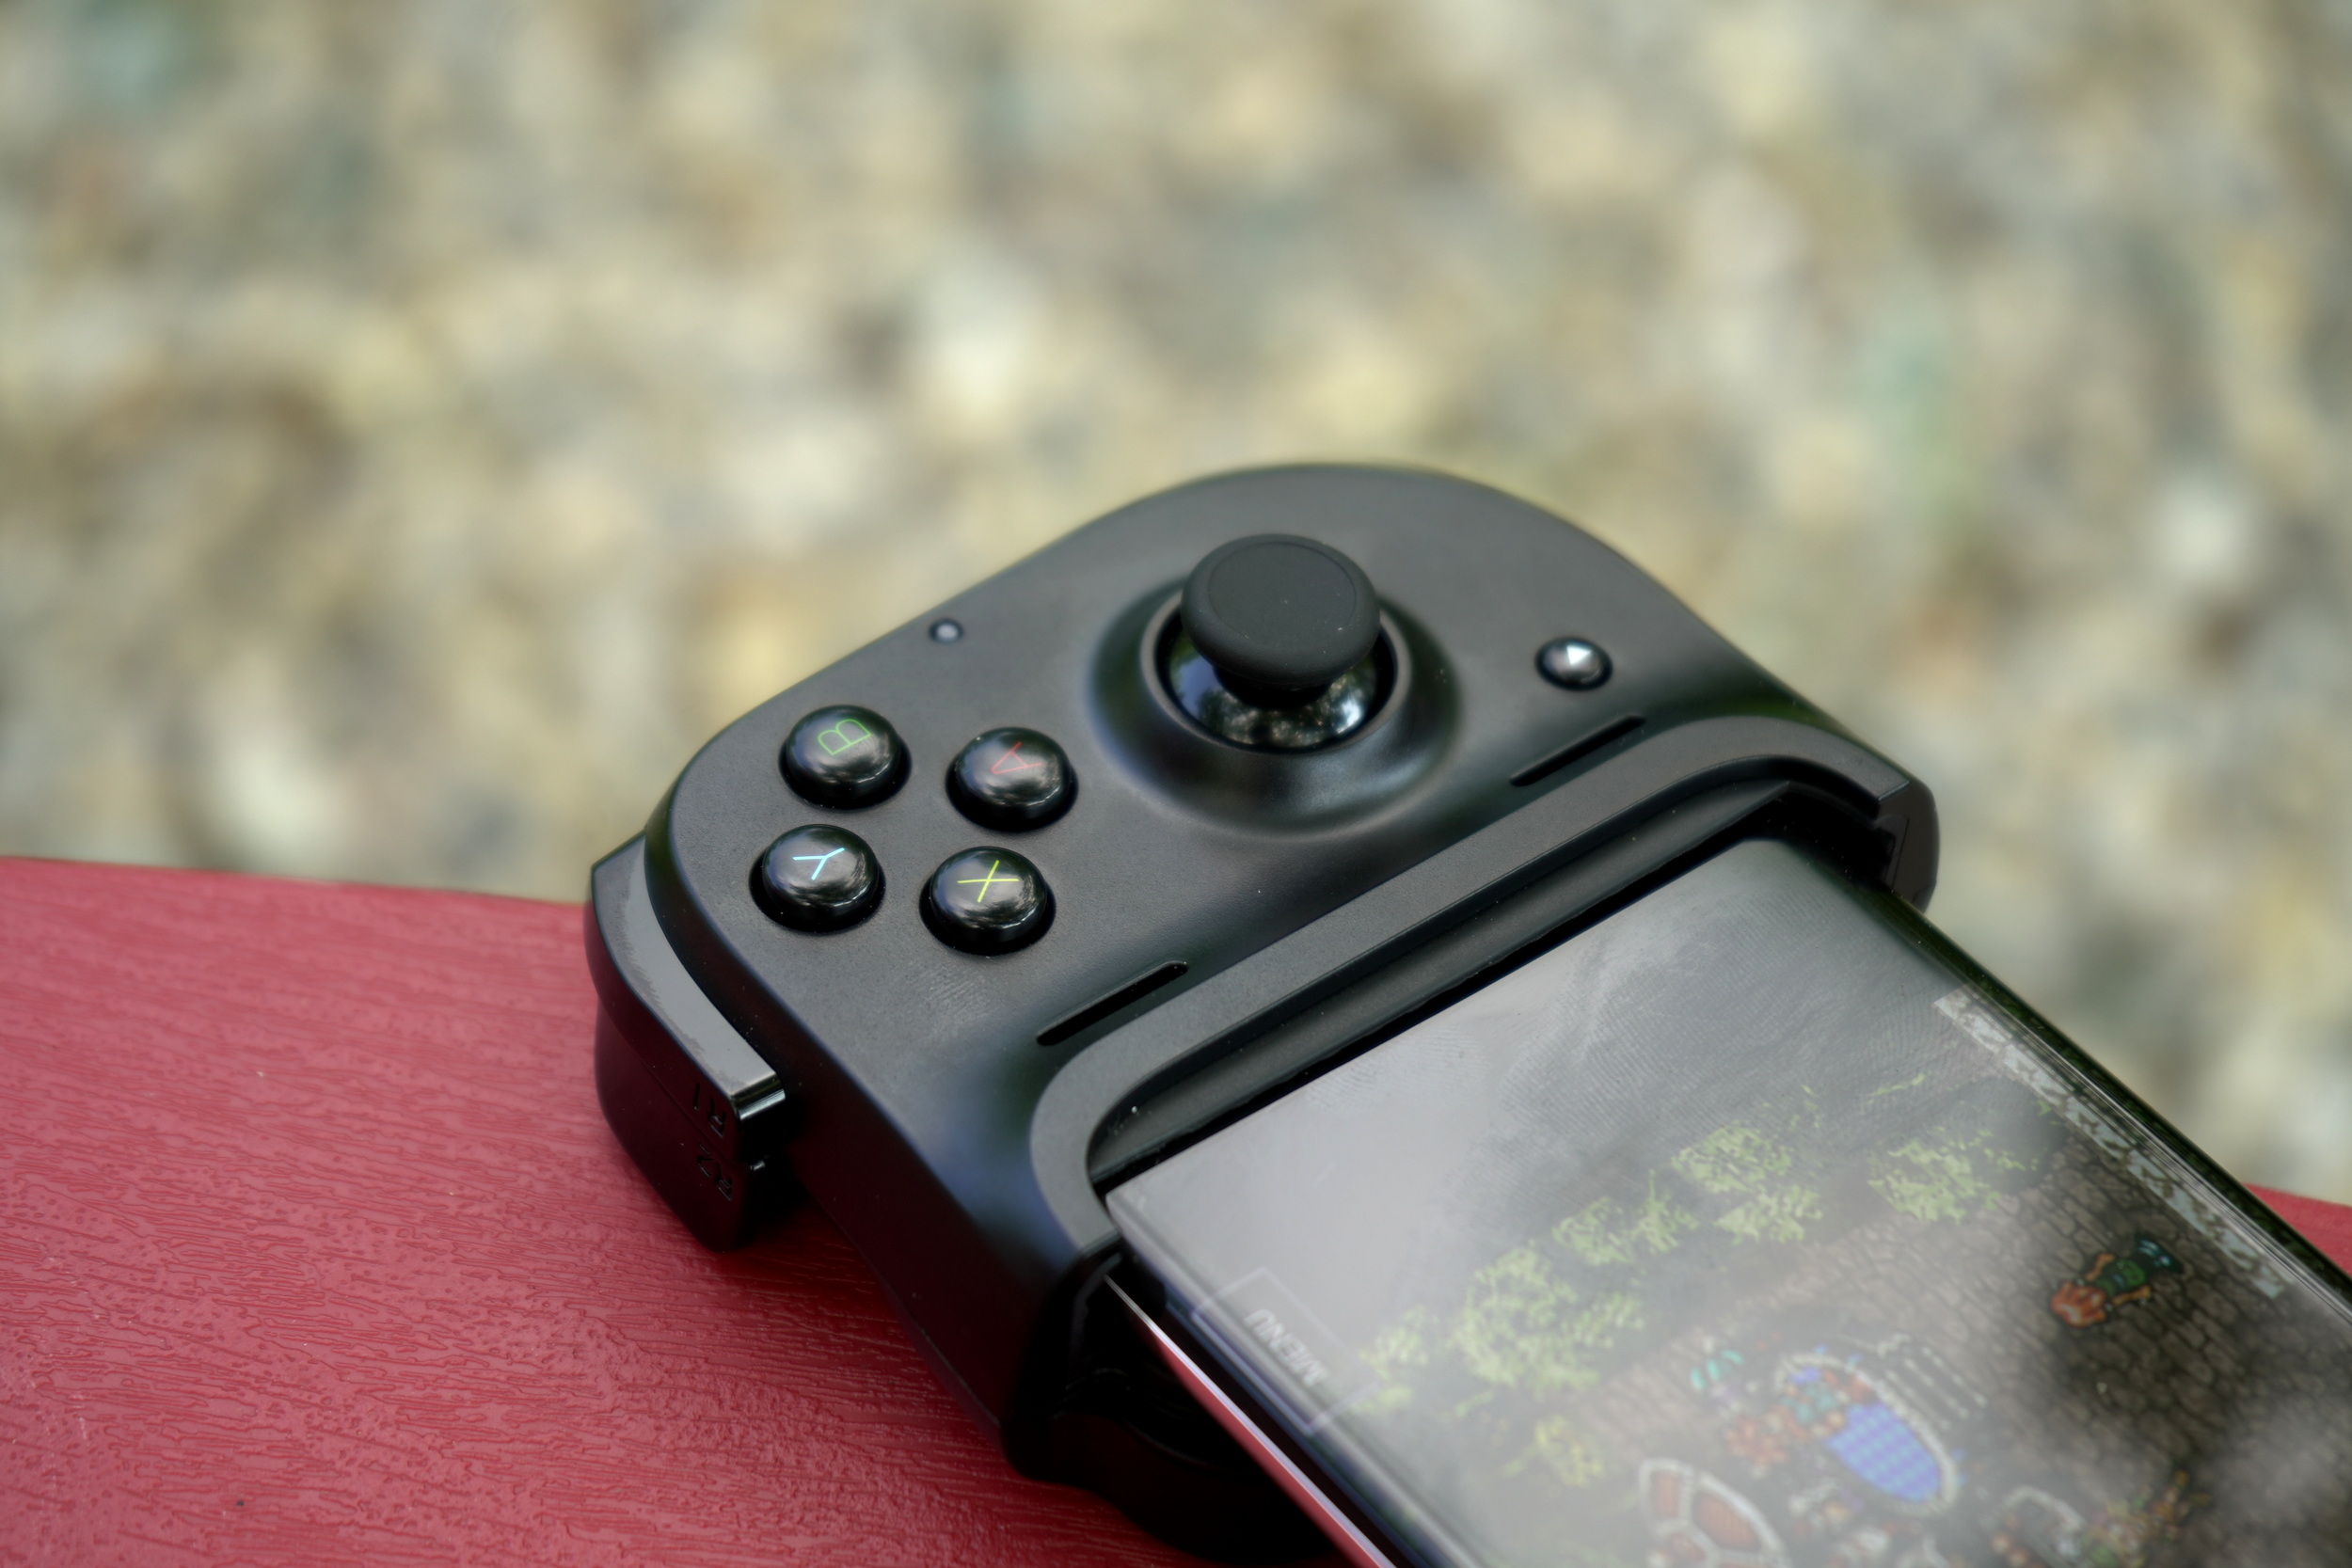 The Razer Kishi controller is the best way to experience Project